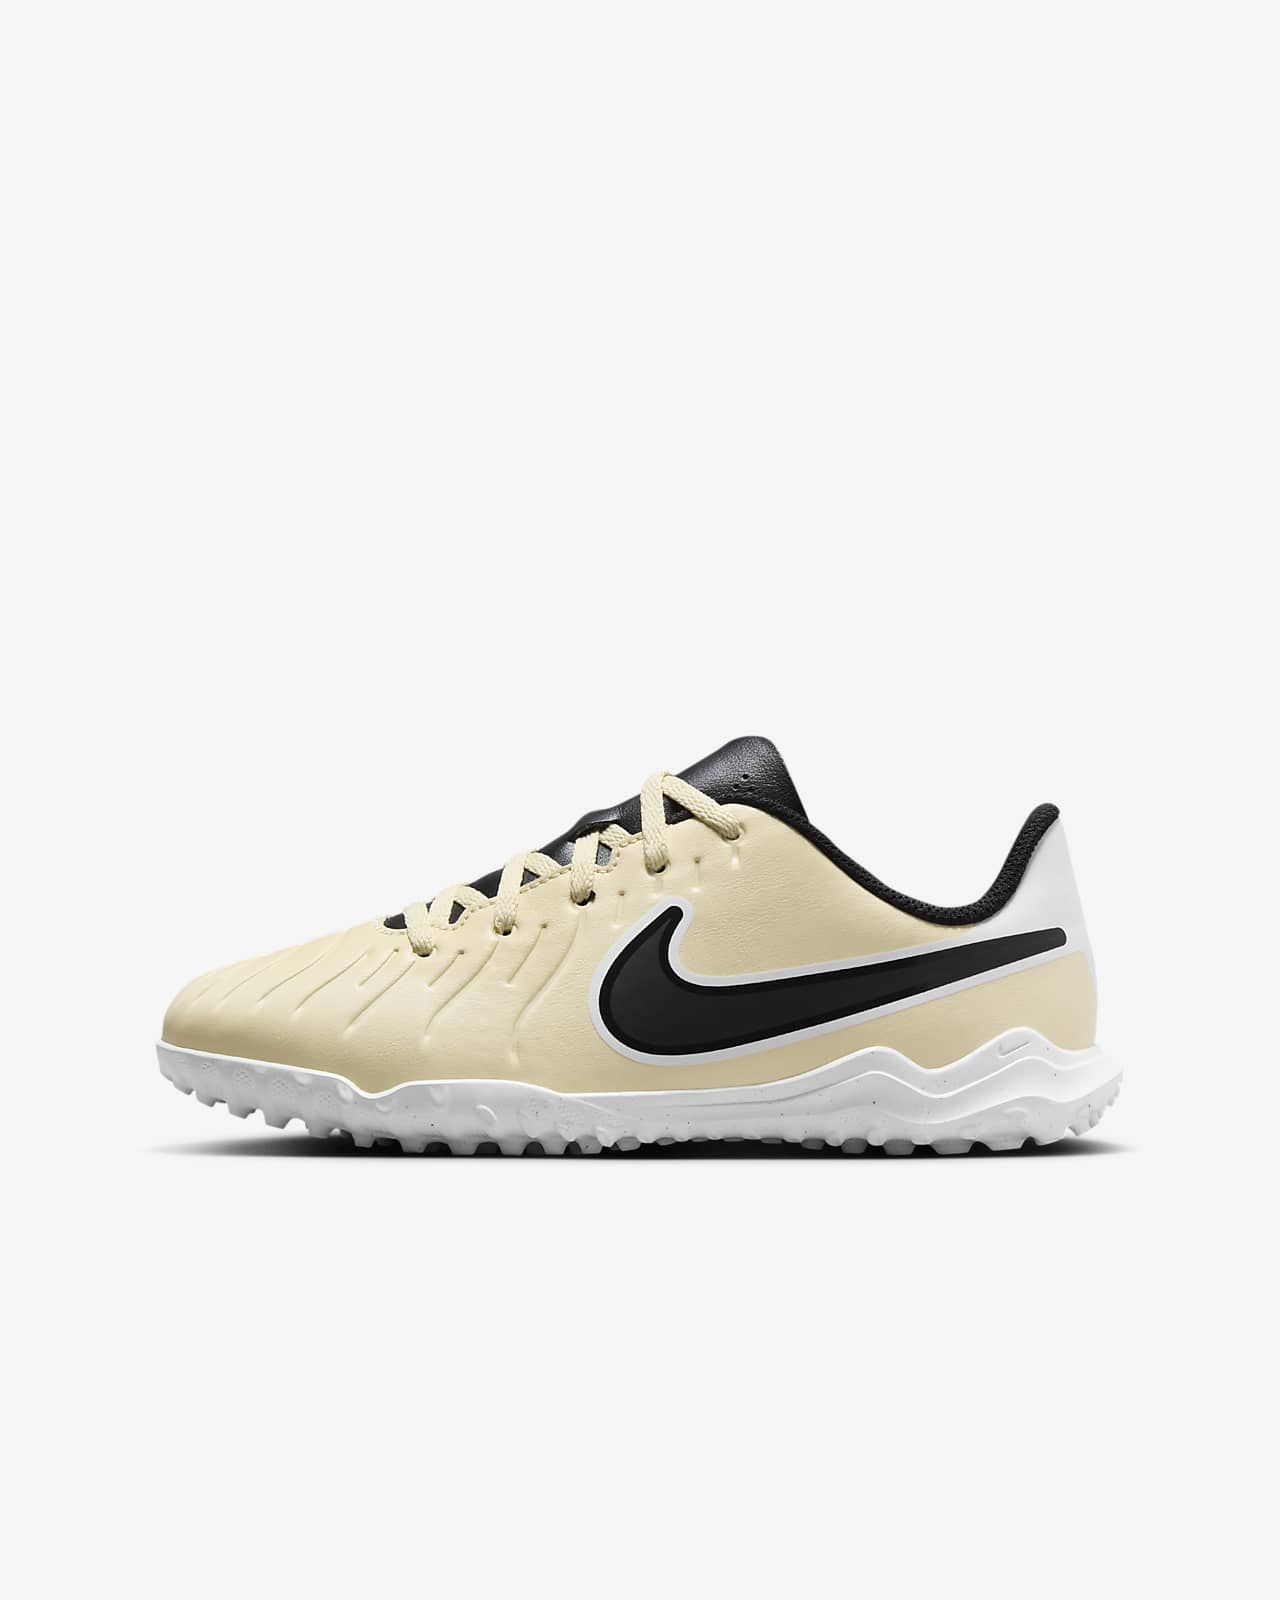 Nike chaussure foot - Cdiscount